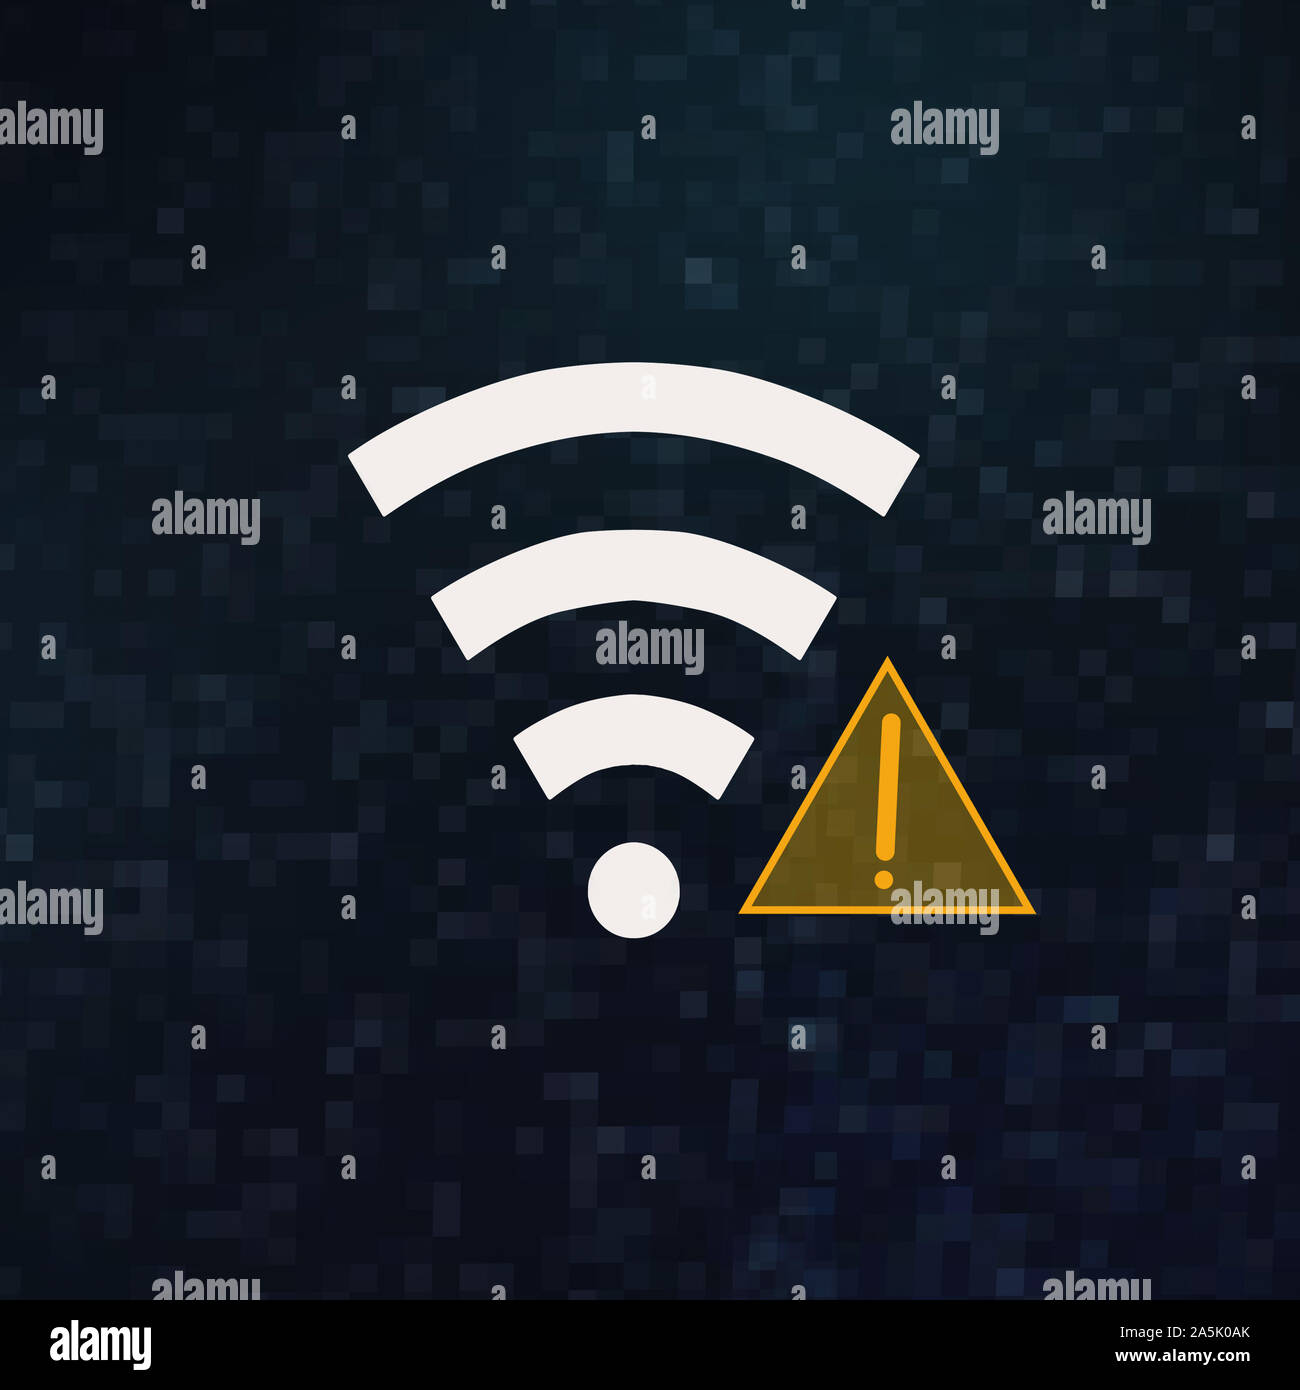 Wifi signal icon and exclamation mark on dark pixel background Stock Photo